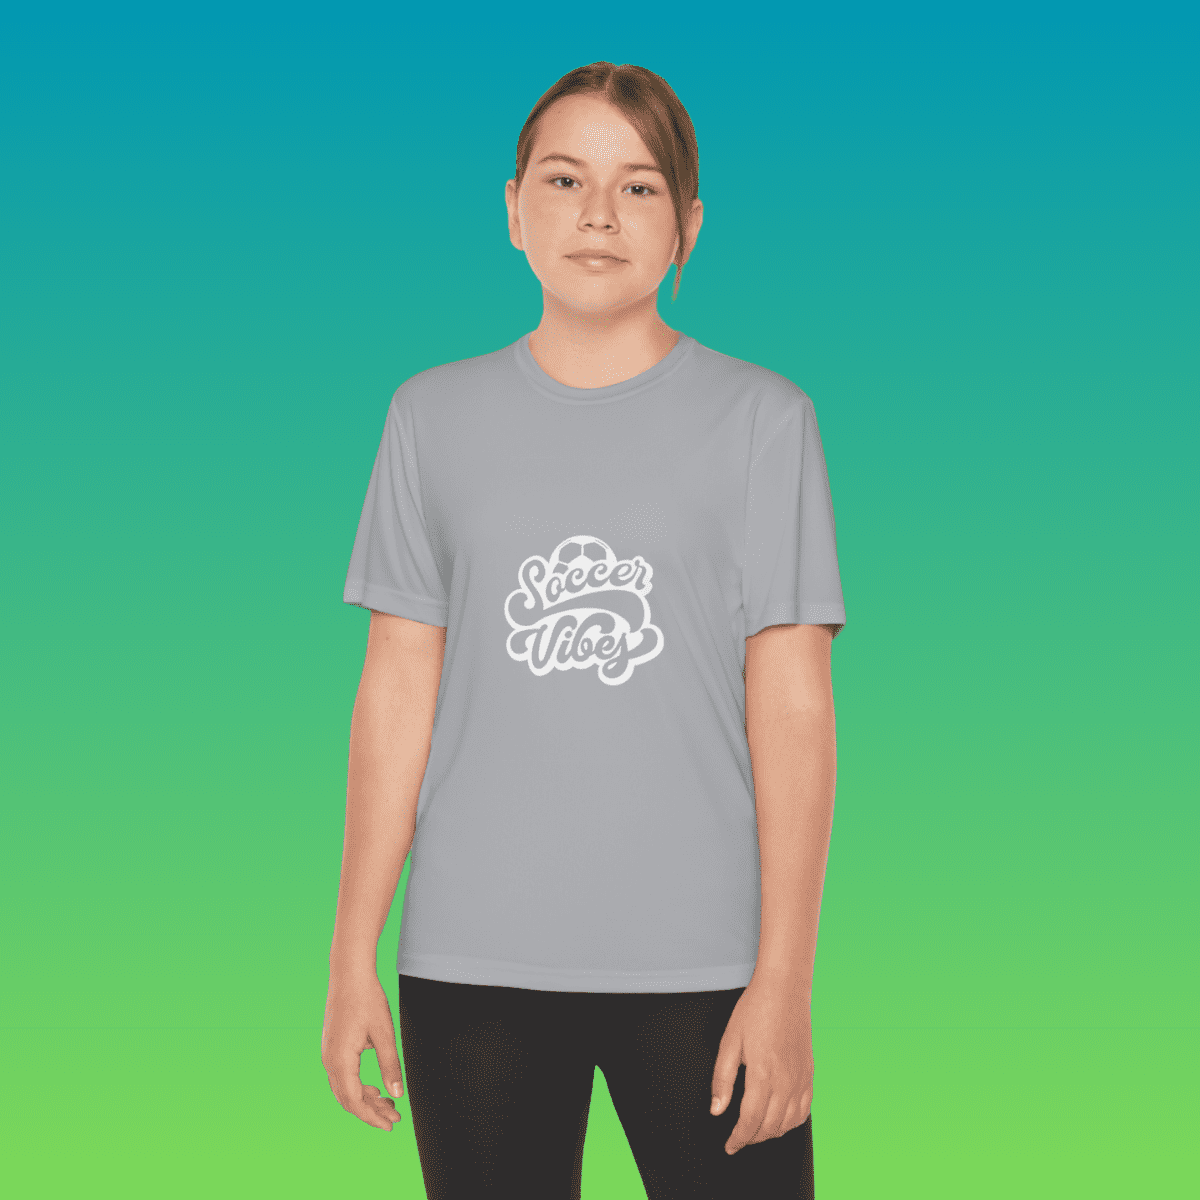 Silver Youth Soccer Vibes Moisture-Wicking Tee